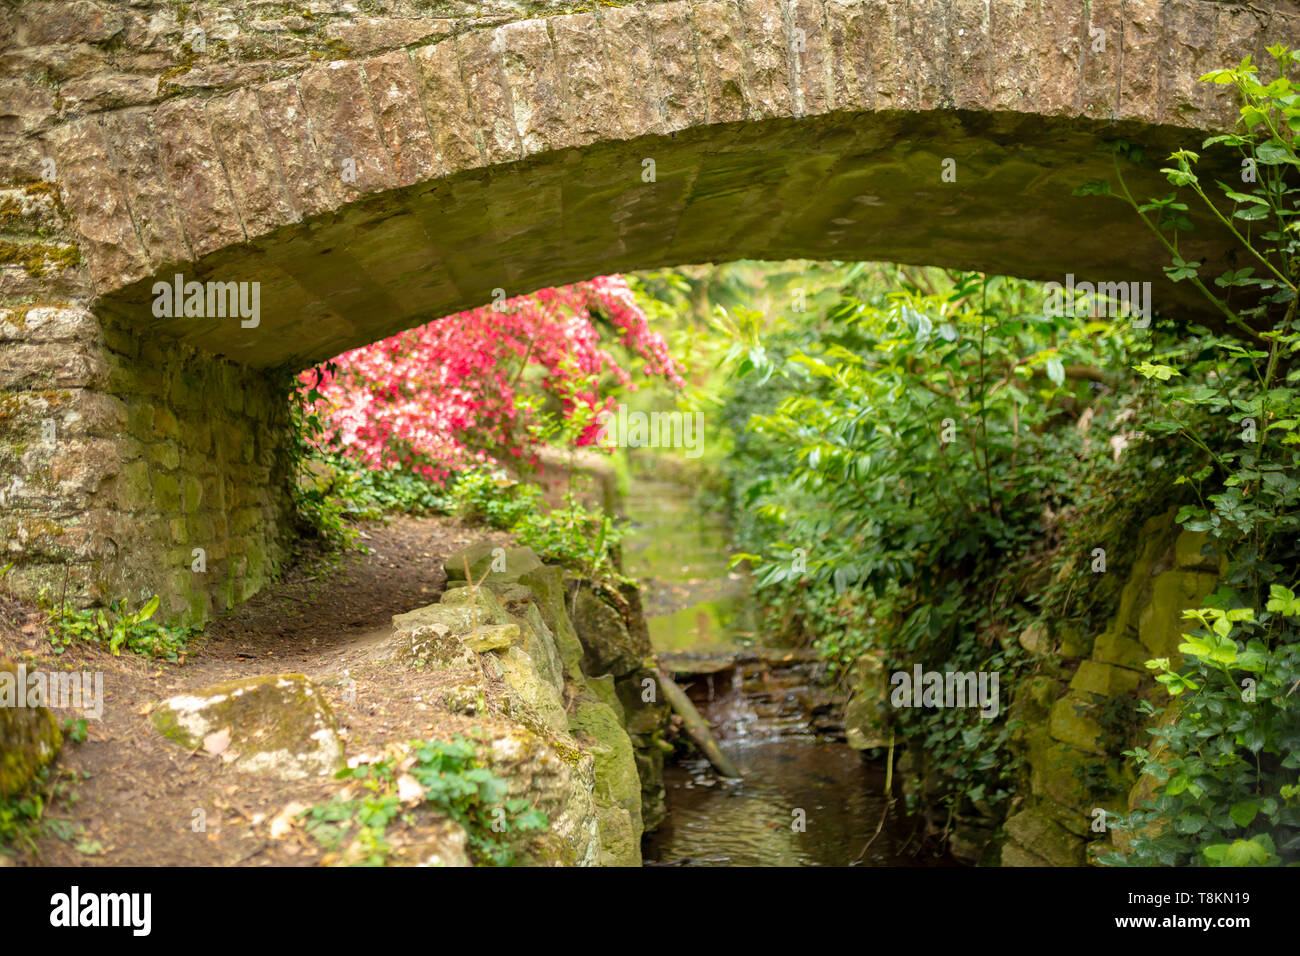 Selective focus colour photograph focused on old stone bridge with pink azaelea and stream in background. Branksome chine gardens, Poole, Dorset, Engl Stock Photo